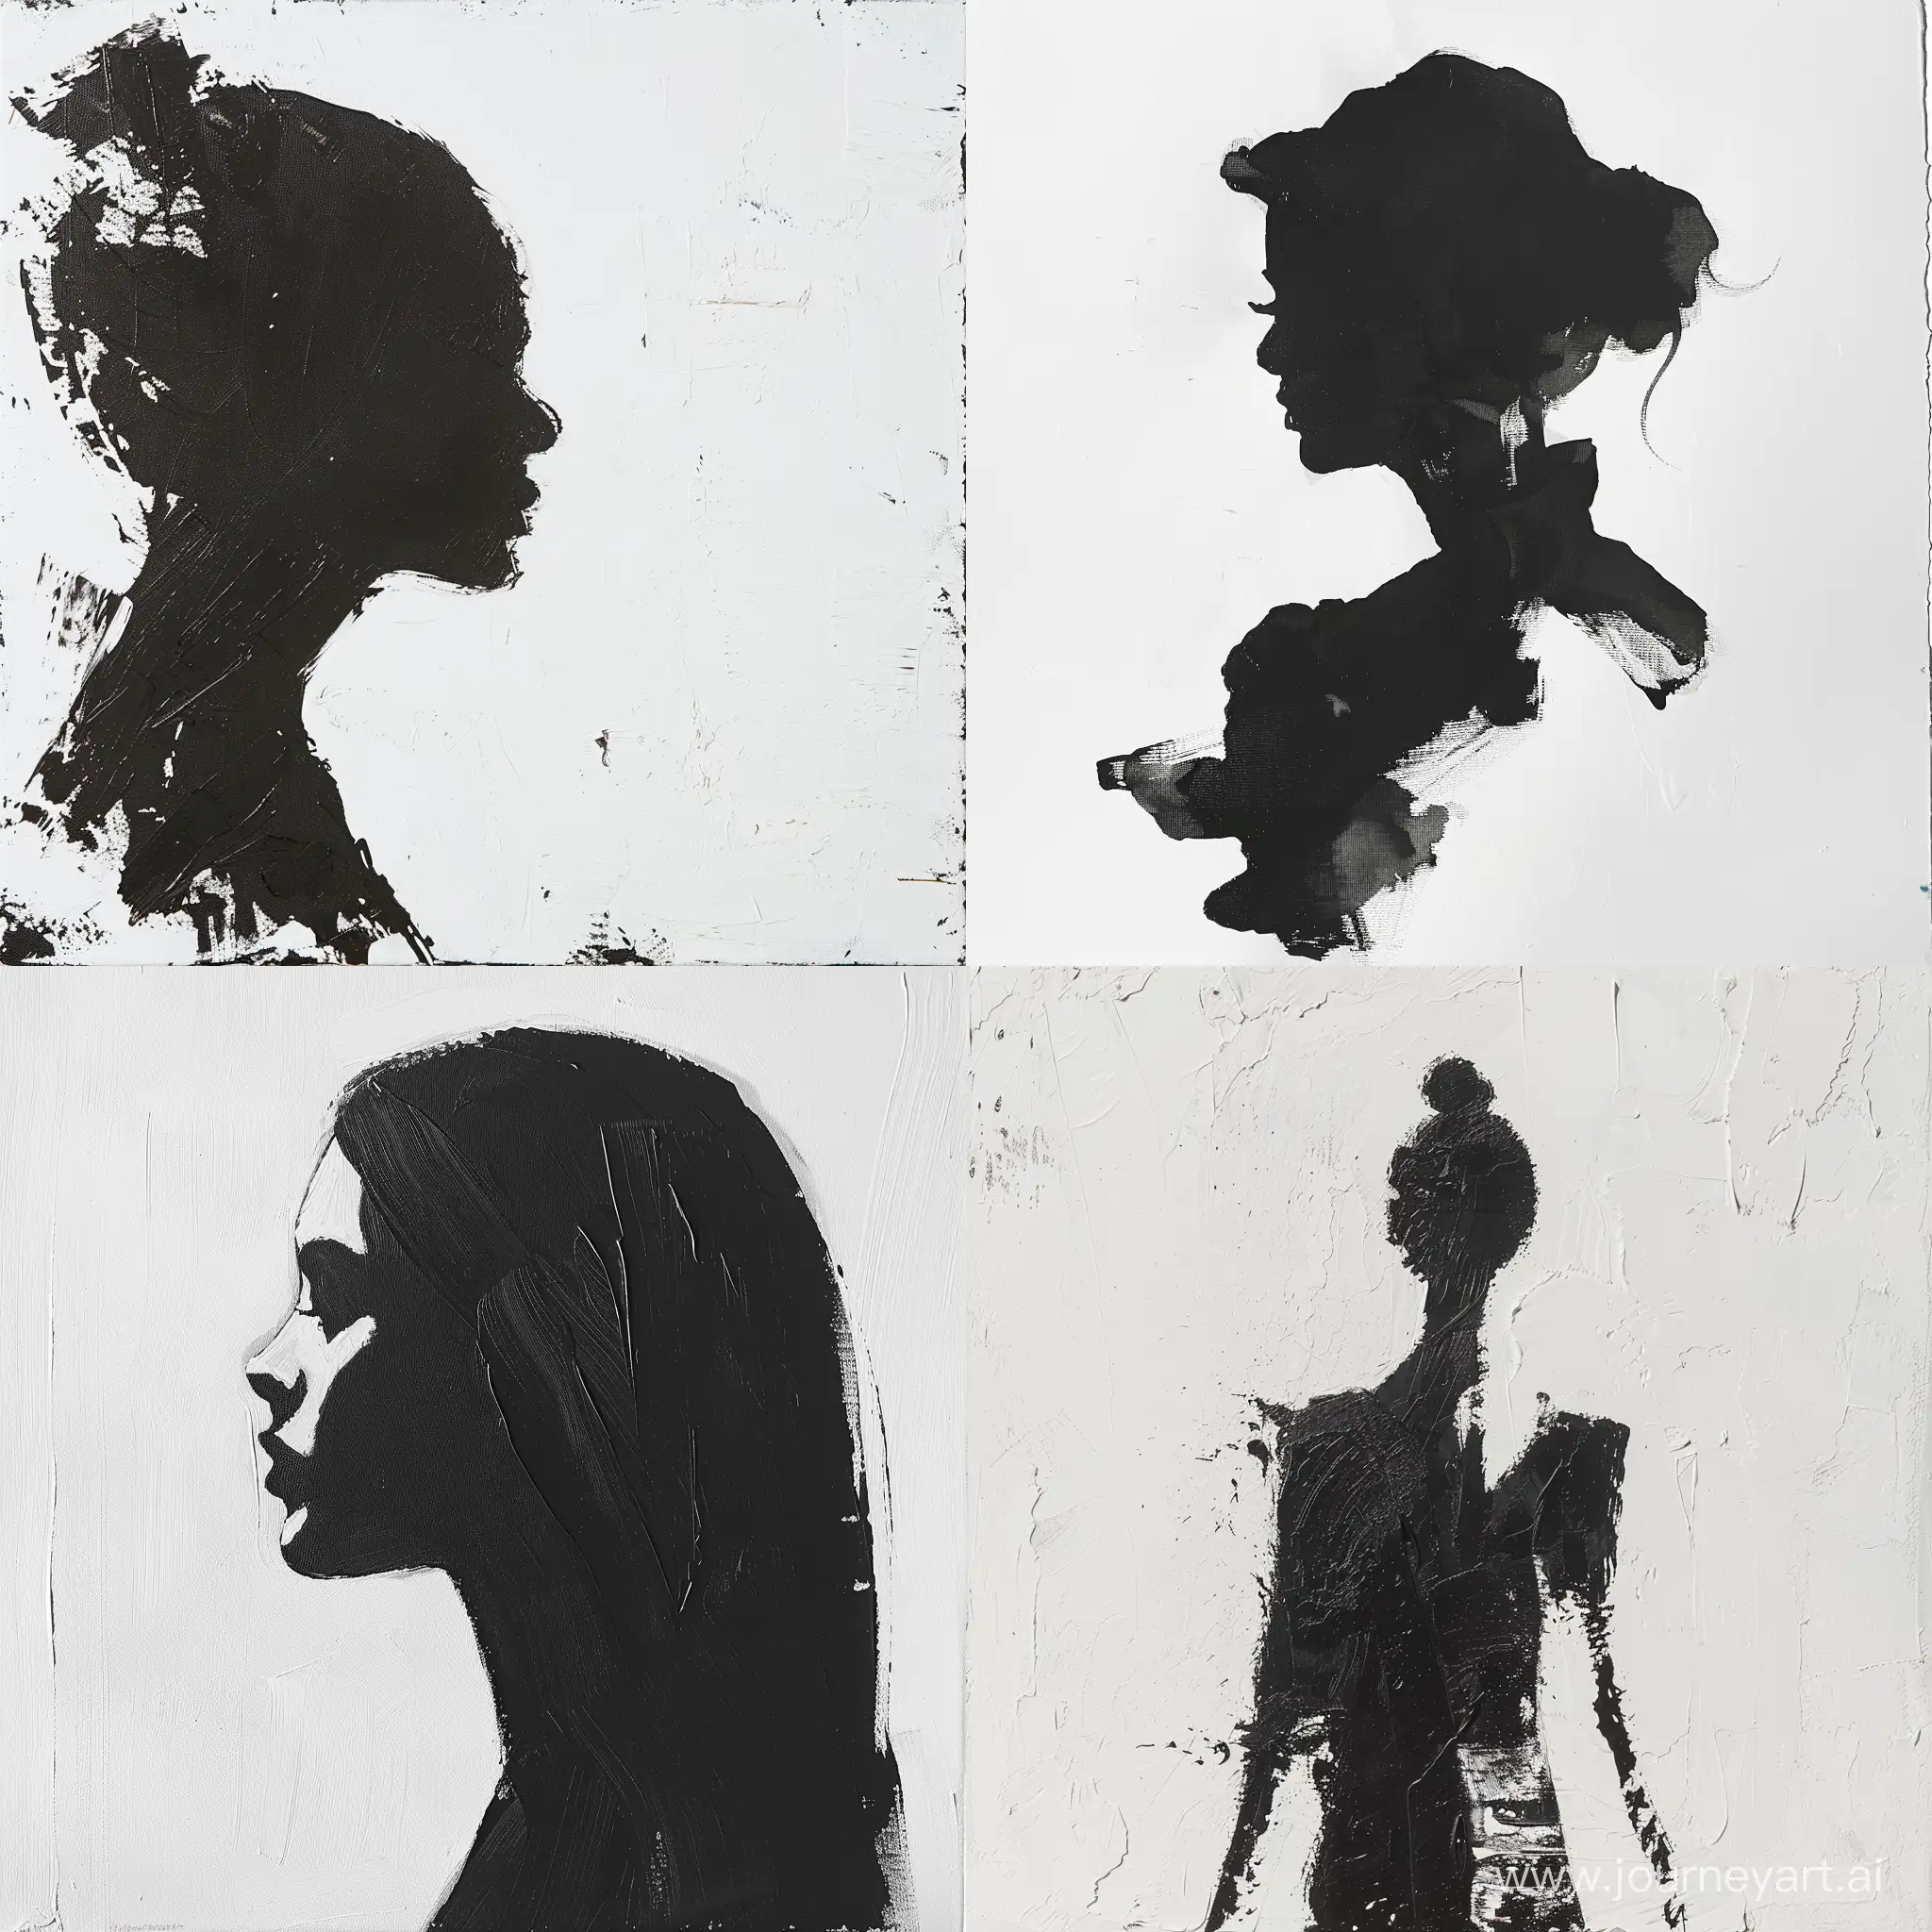 the female silhouette is painted in black and white on a white background